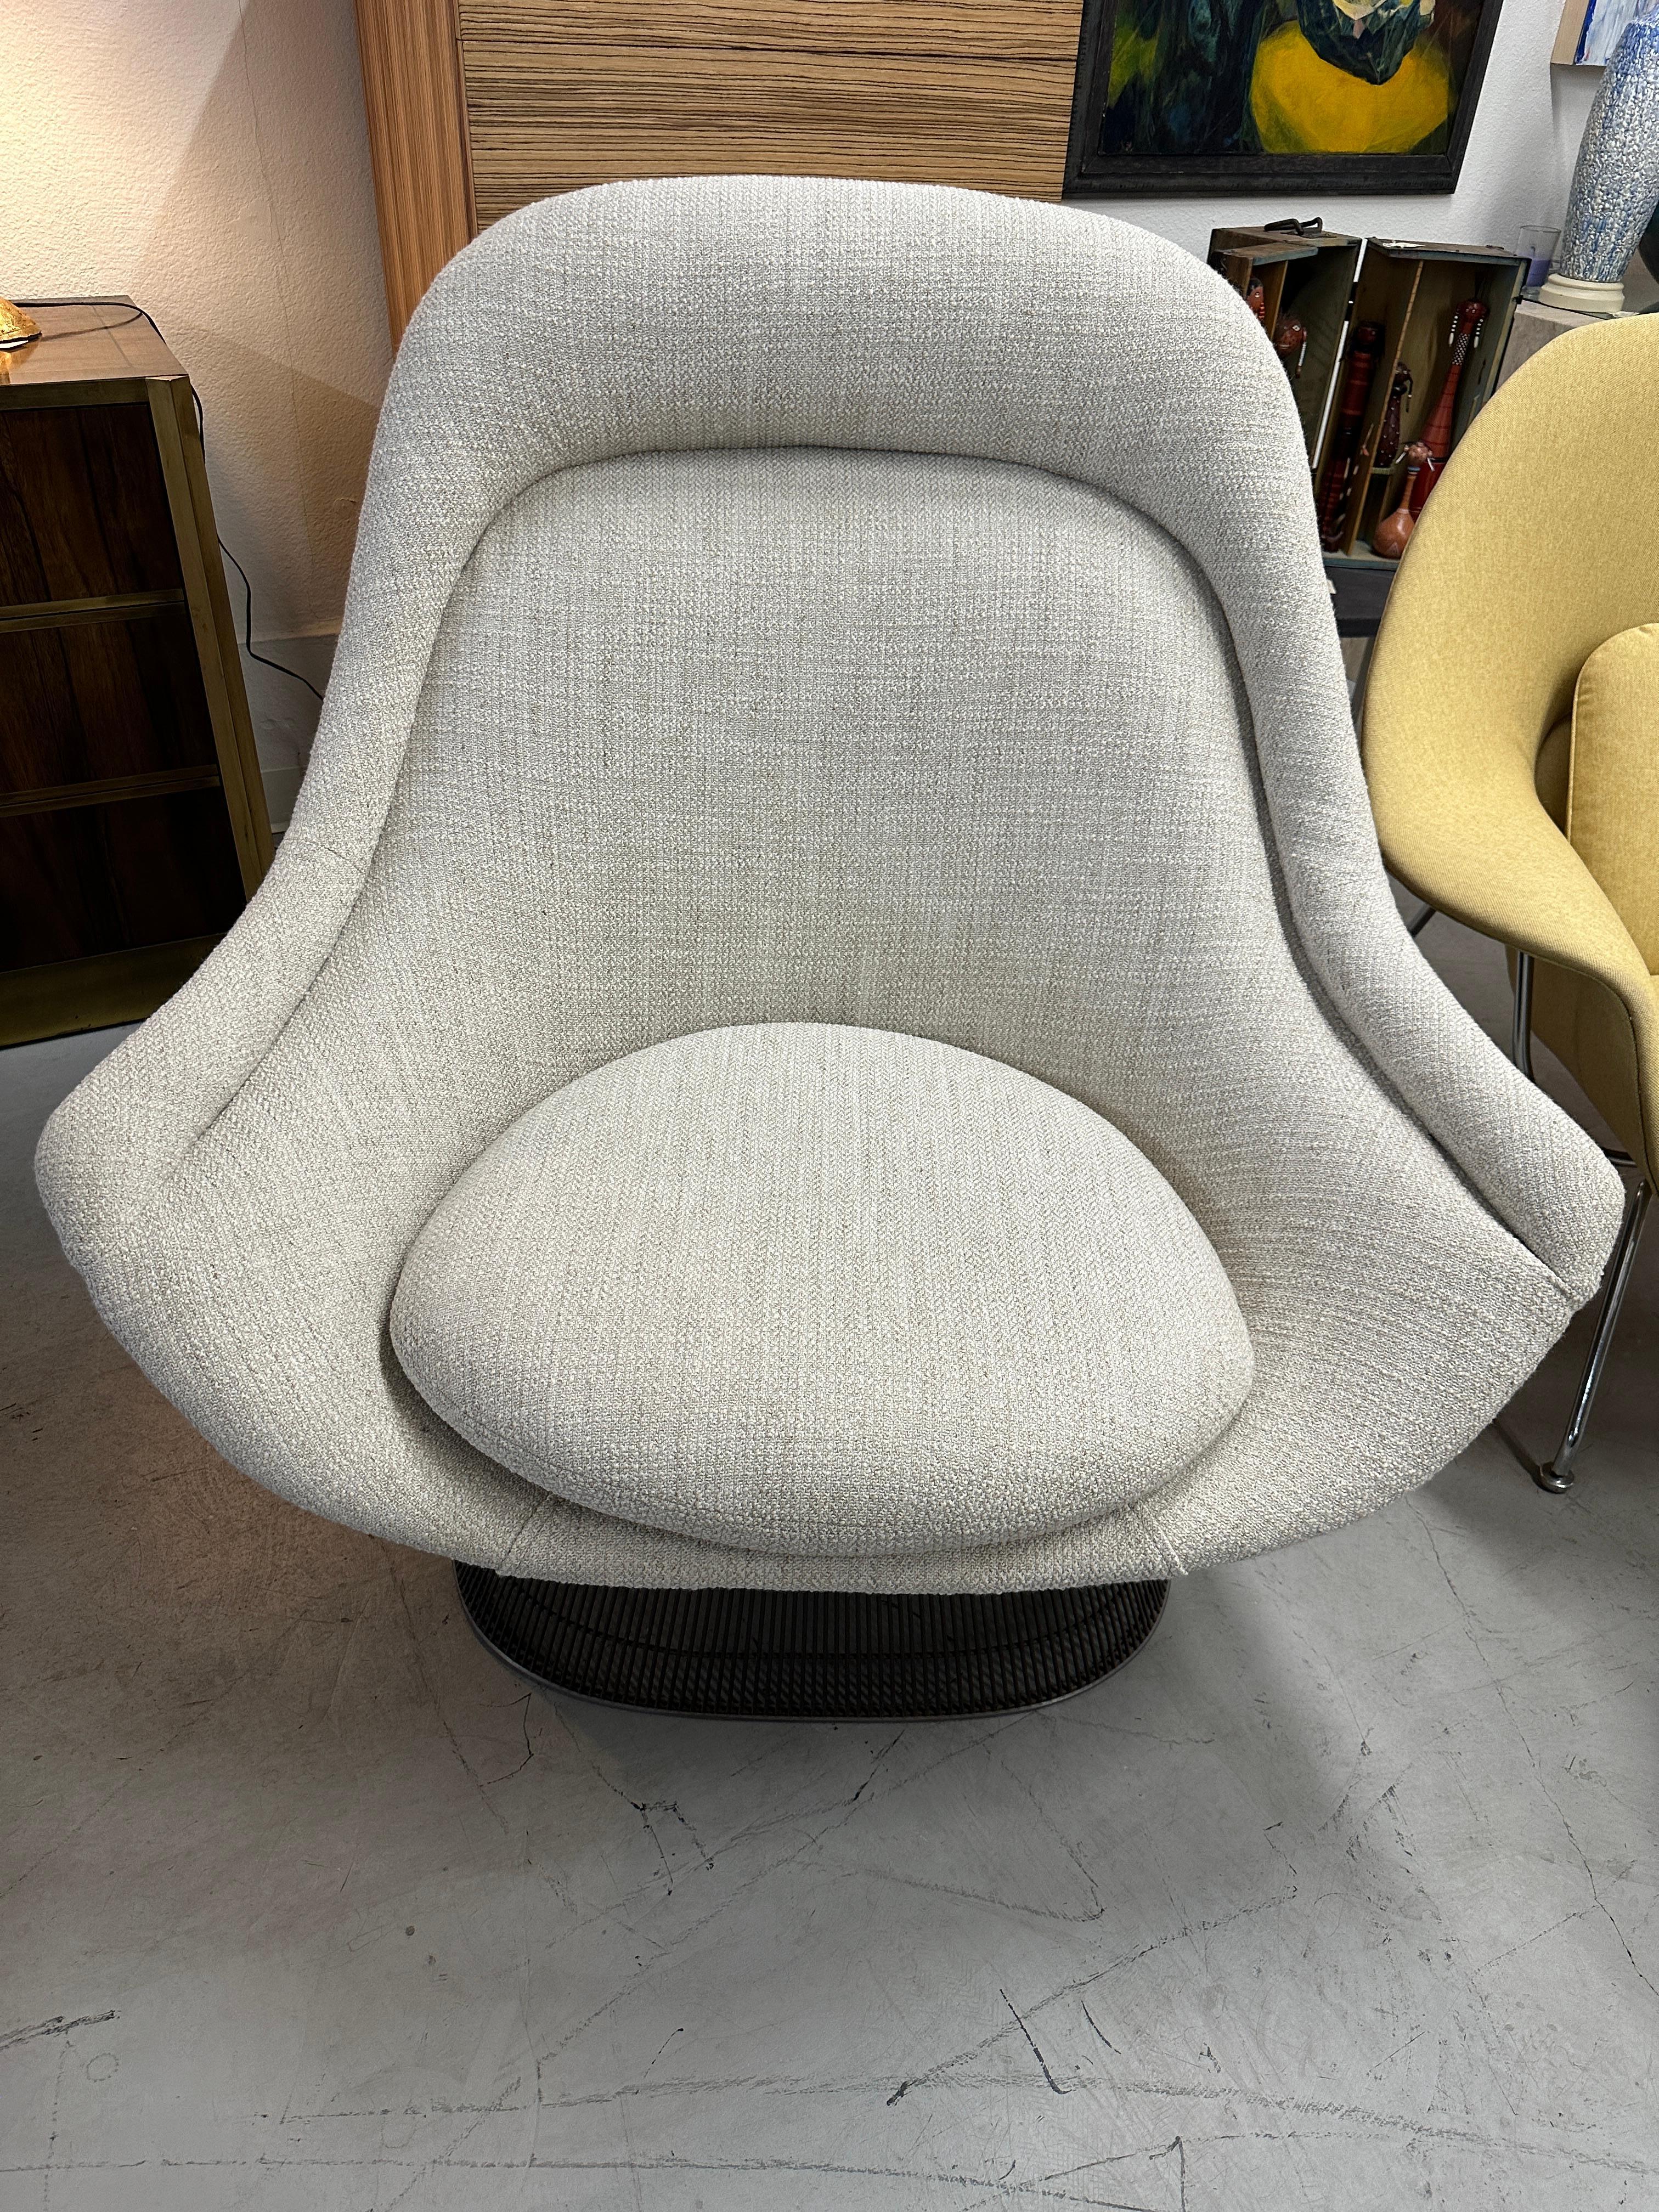 A beautiful Warren Platner Big Easy Chair for Knoll. Originally purchased in the 1980's this chair was recently re-upholstered in a pretty Knoll fabric. It is in the Bronze Metallic finish. The chair is in good condition, although there is a tiny